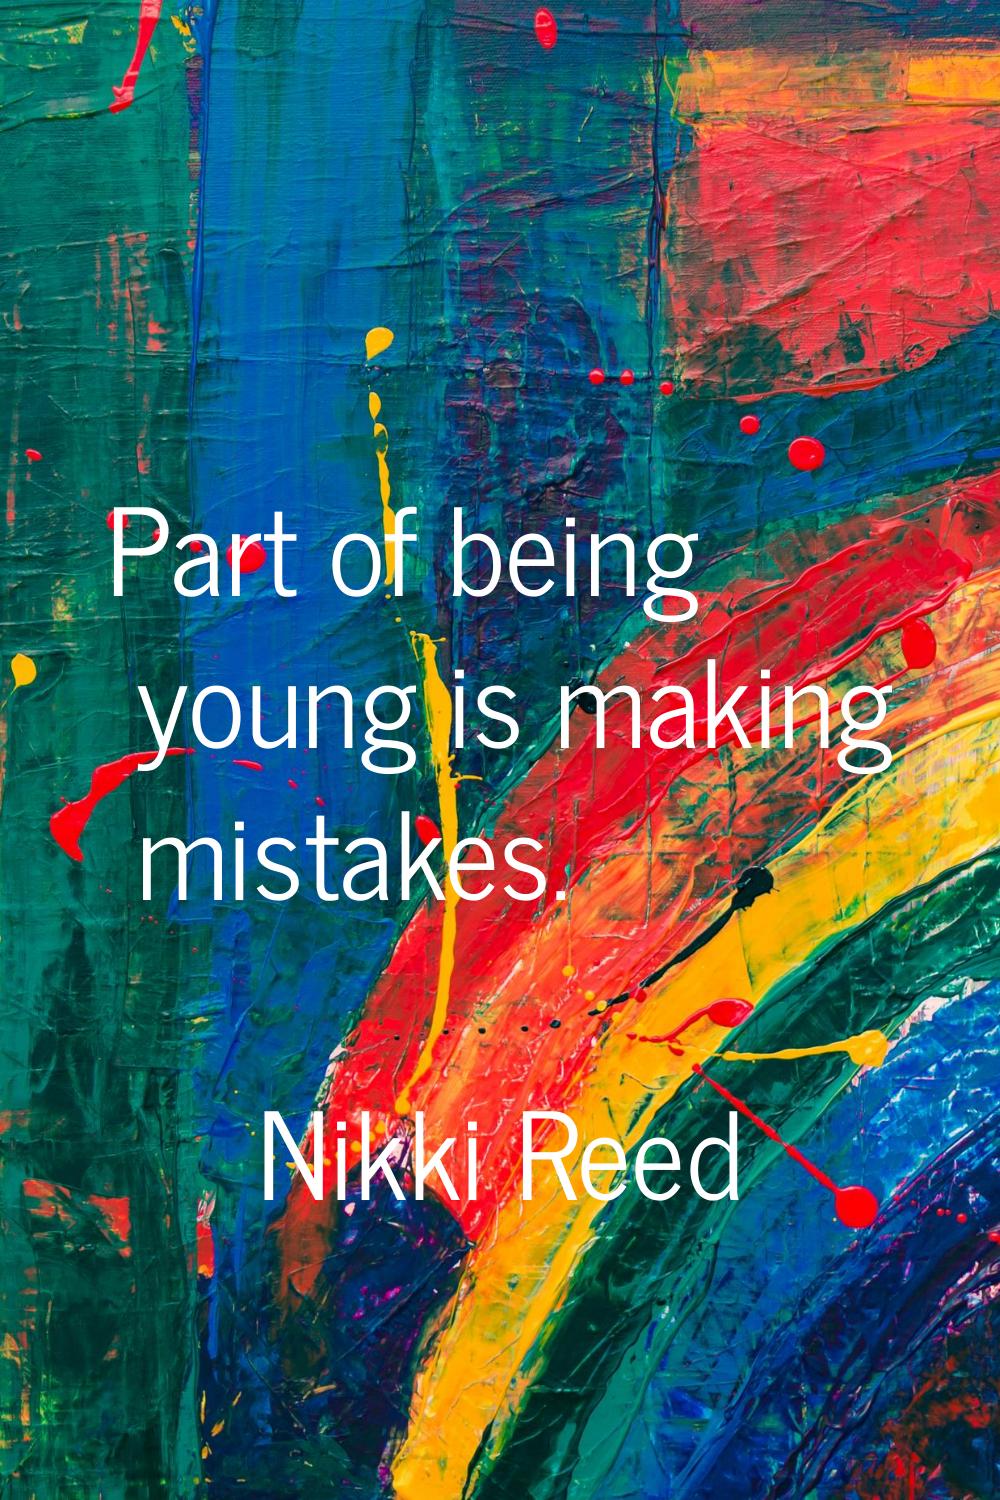 Part of being young is making mistakes.